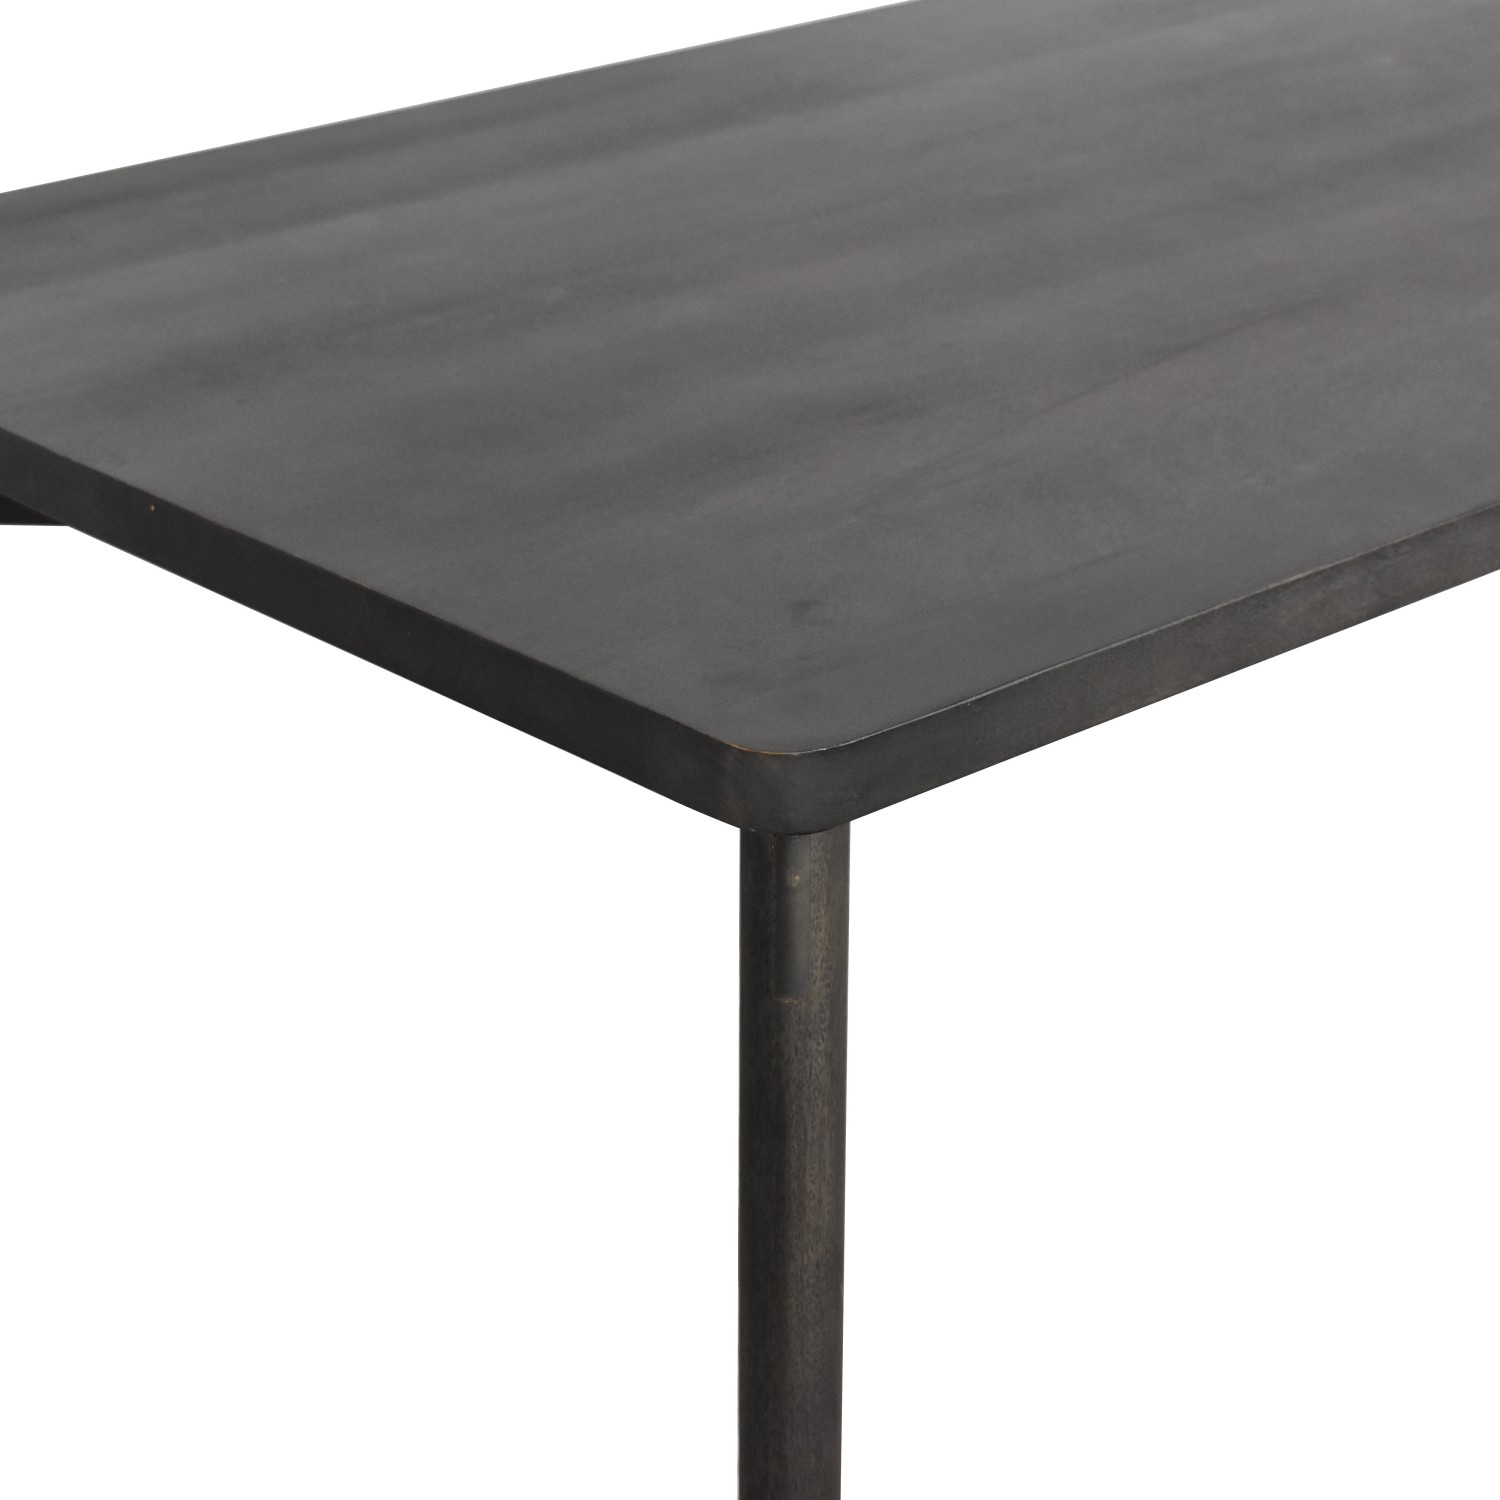 CB2 Finmark Charcoal Dining Table | 39% Off | Kaiyo